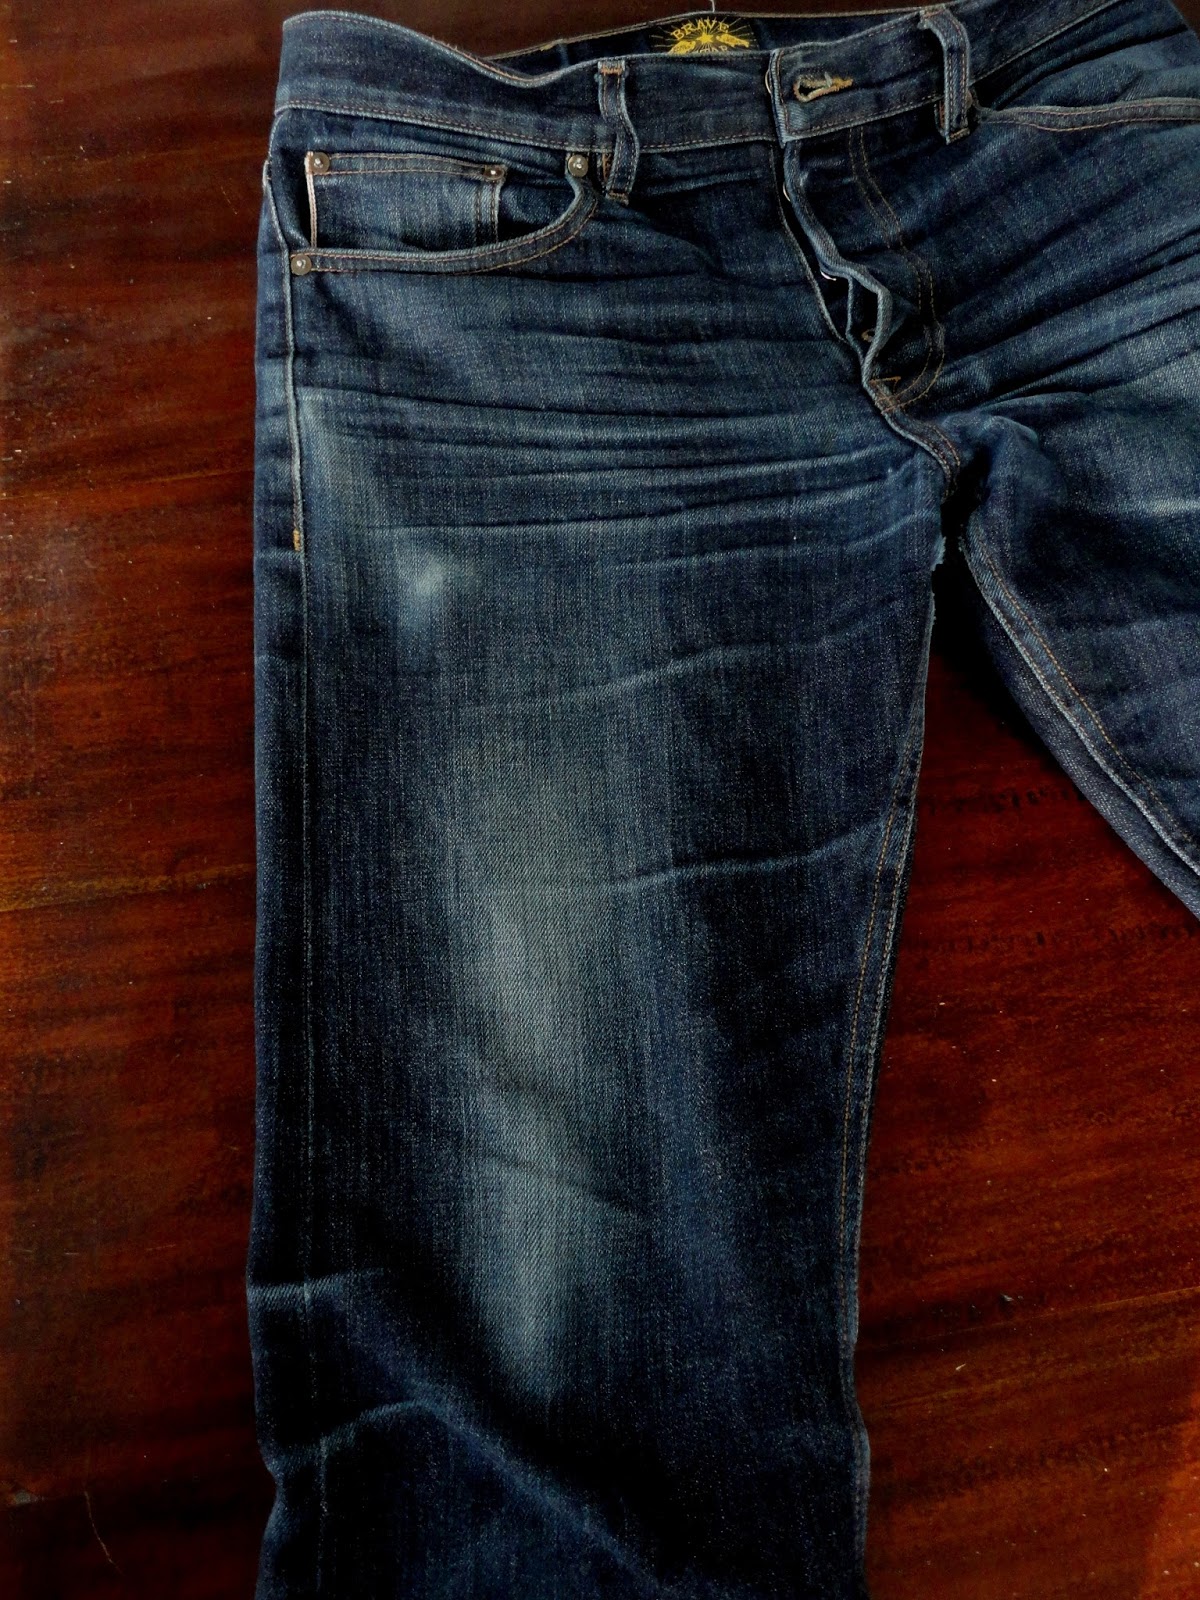 Landless Gentry: Denim Review: 15 oz. Cone mills Selvage by Bravestar  Selvage